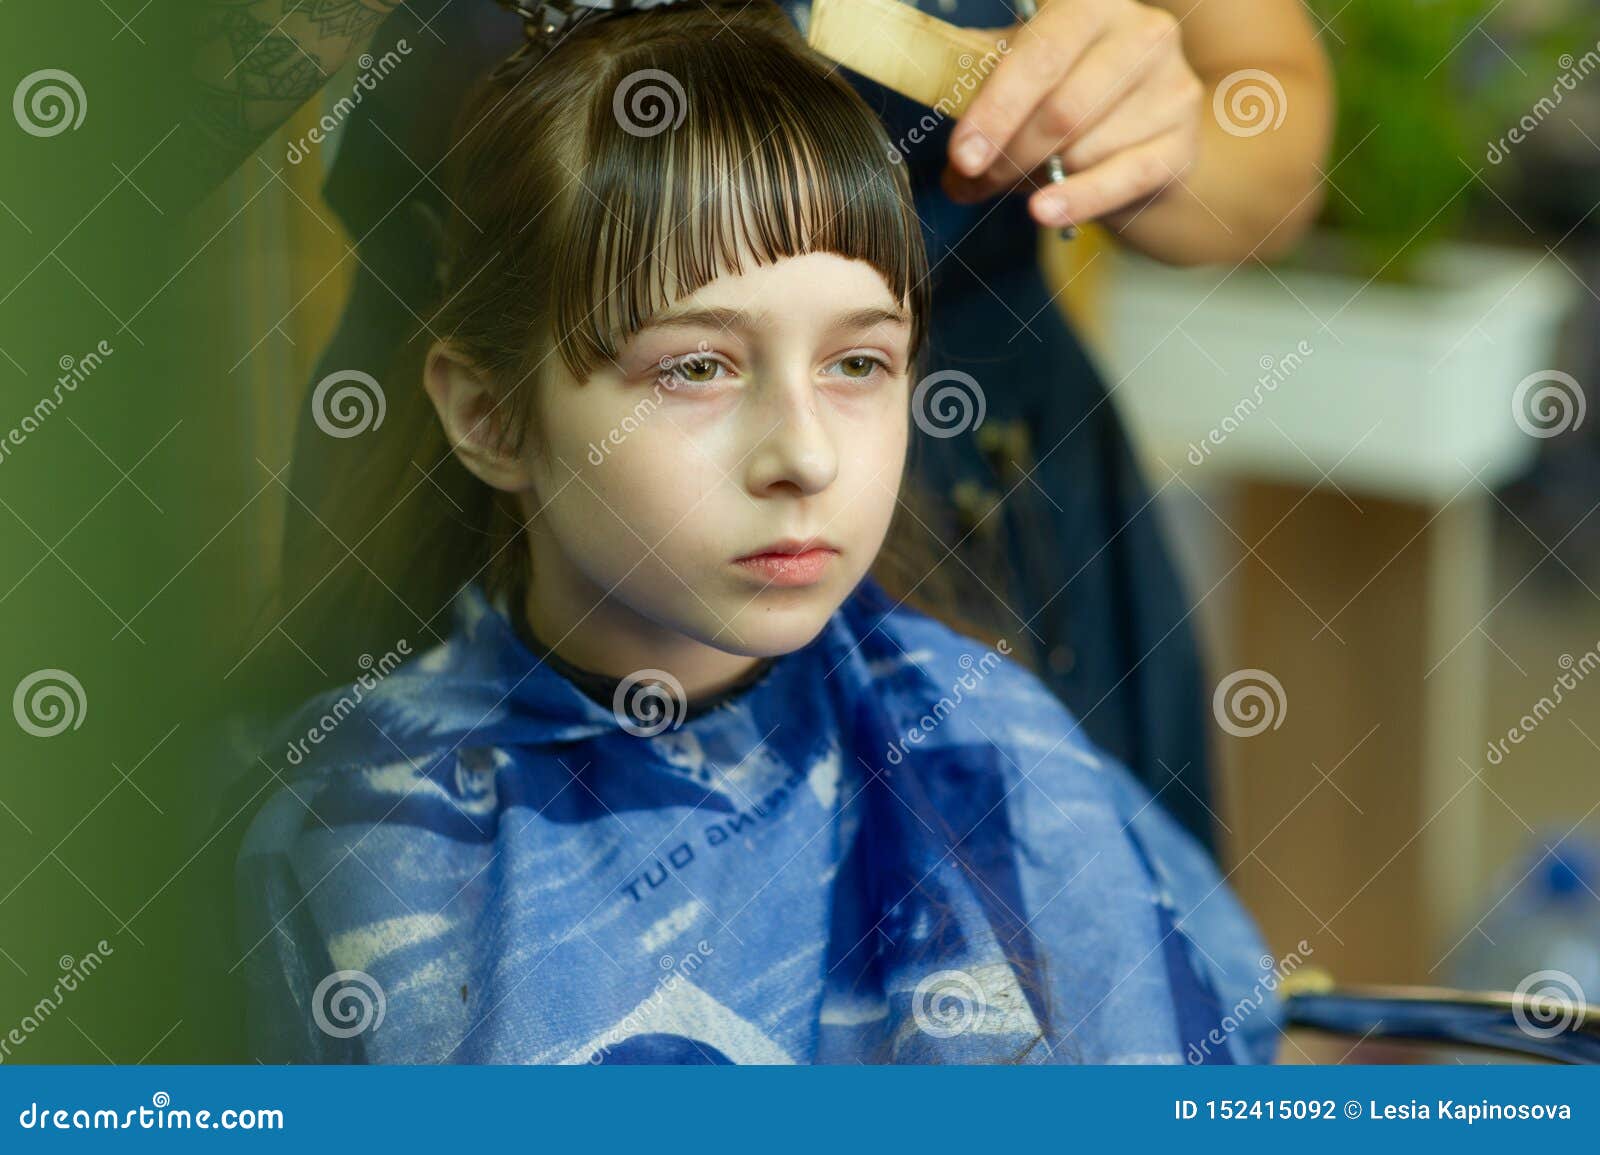 Hairdresser Making A Hair Style To Cute Little Girl Stock